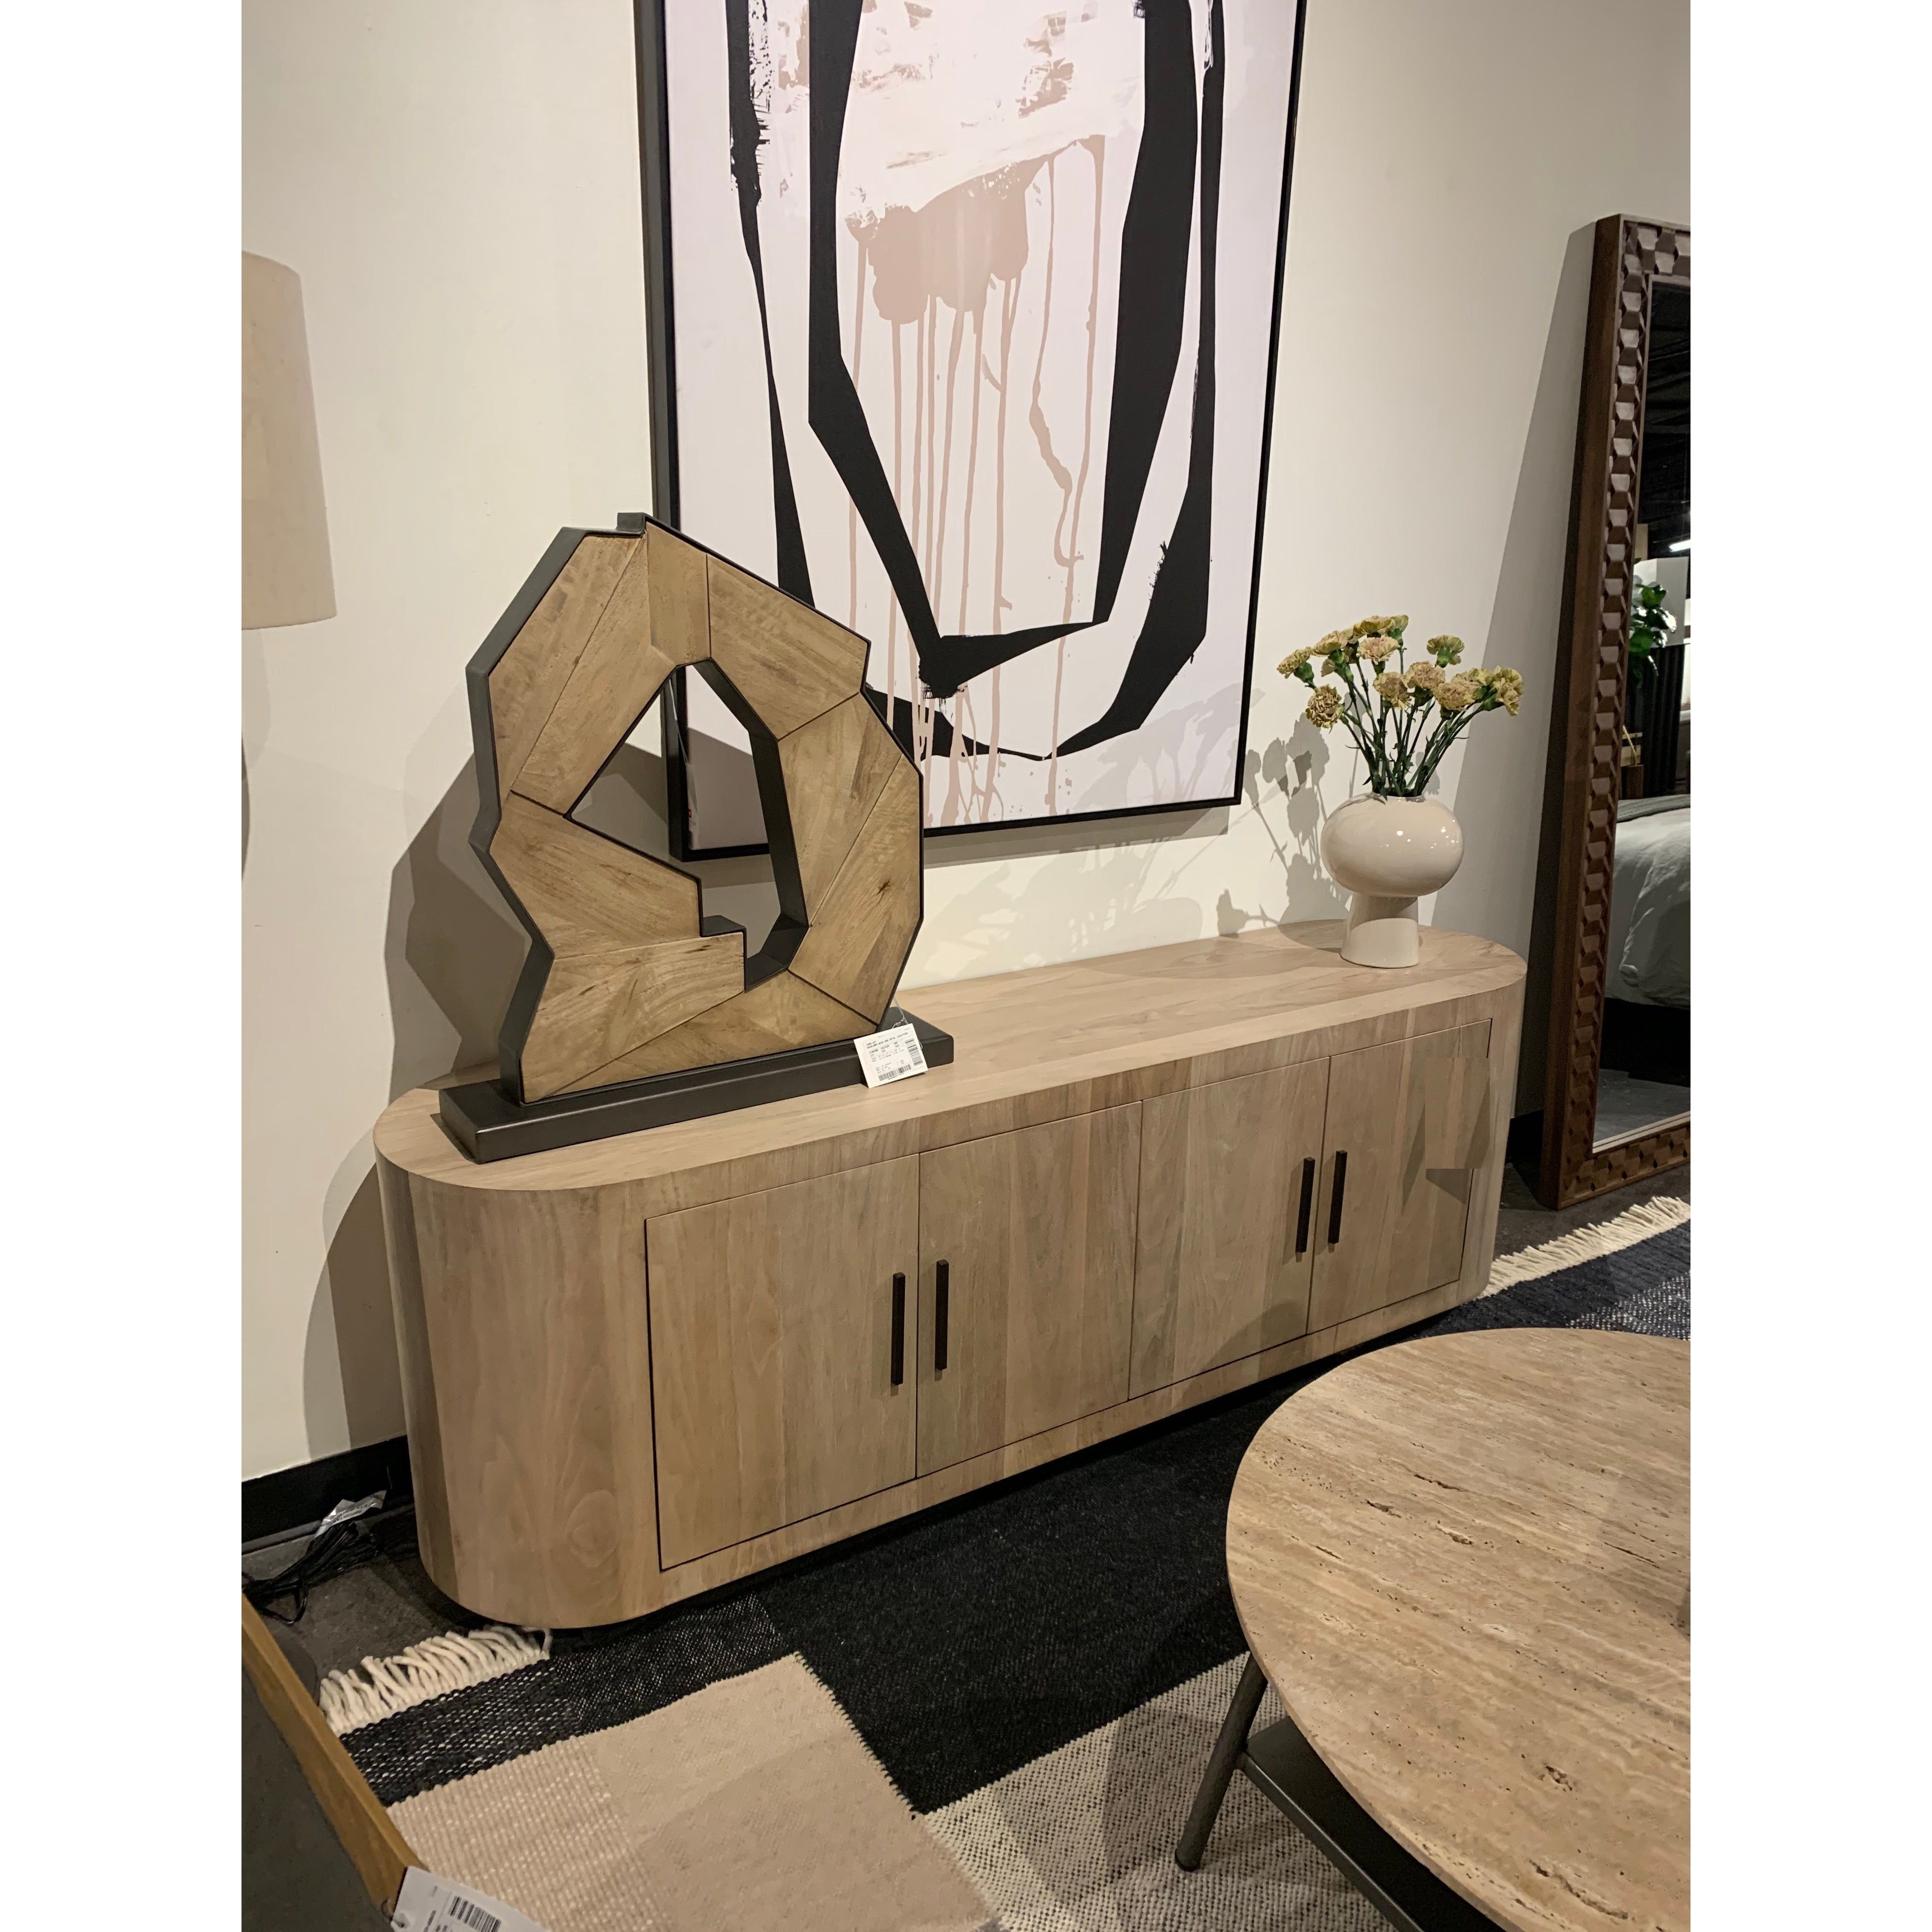 This Hudson Sideboard - Ashen Walnut is a lovely pill-shaped media console that opens to two spacious drawers. The gunmetal handles bring a sleek to look to the piece. Reflective of woods' natural character, a slight color variance is possible. Overall Dimensions: 86.00"w x 20.00"d x 34.00"h